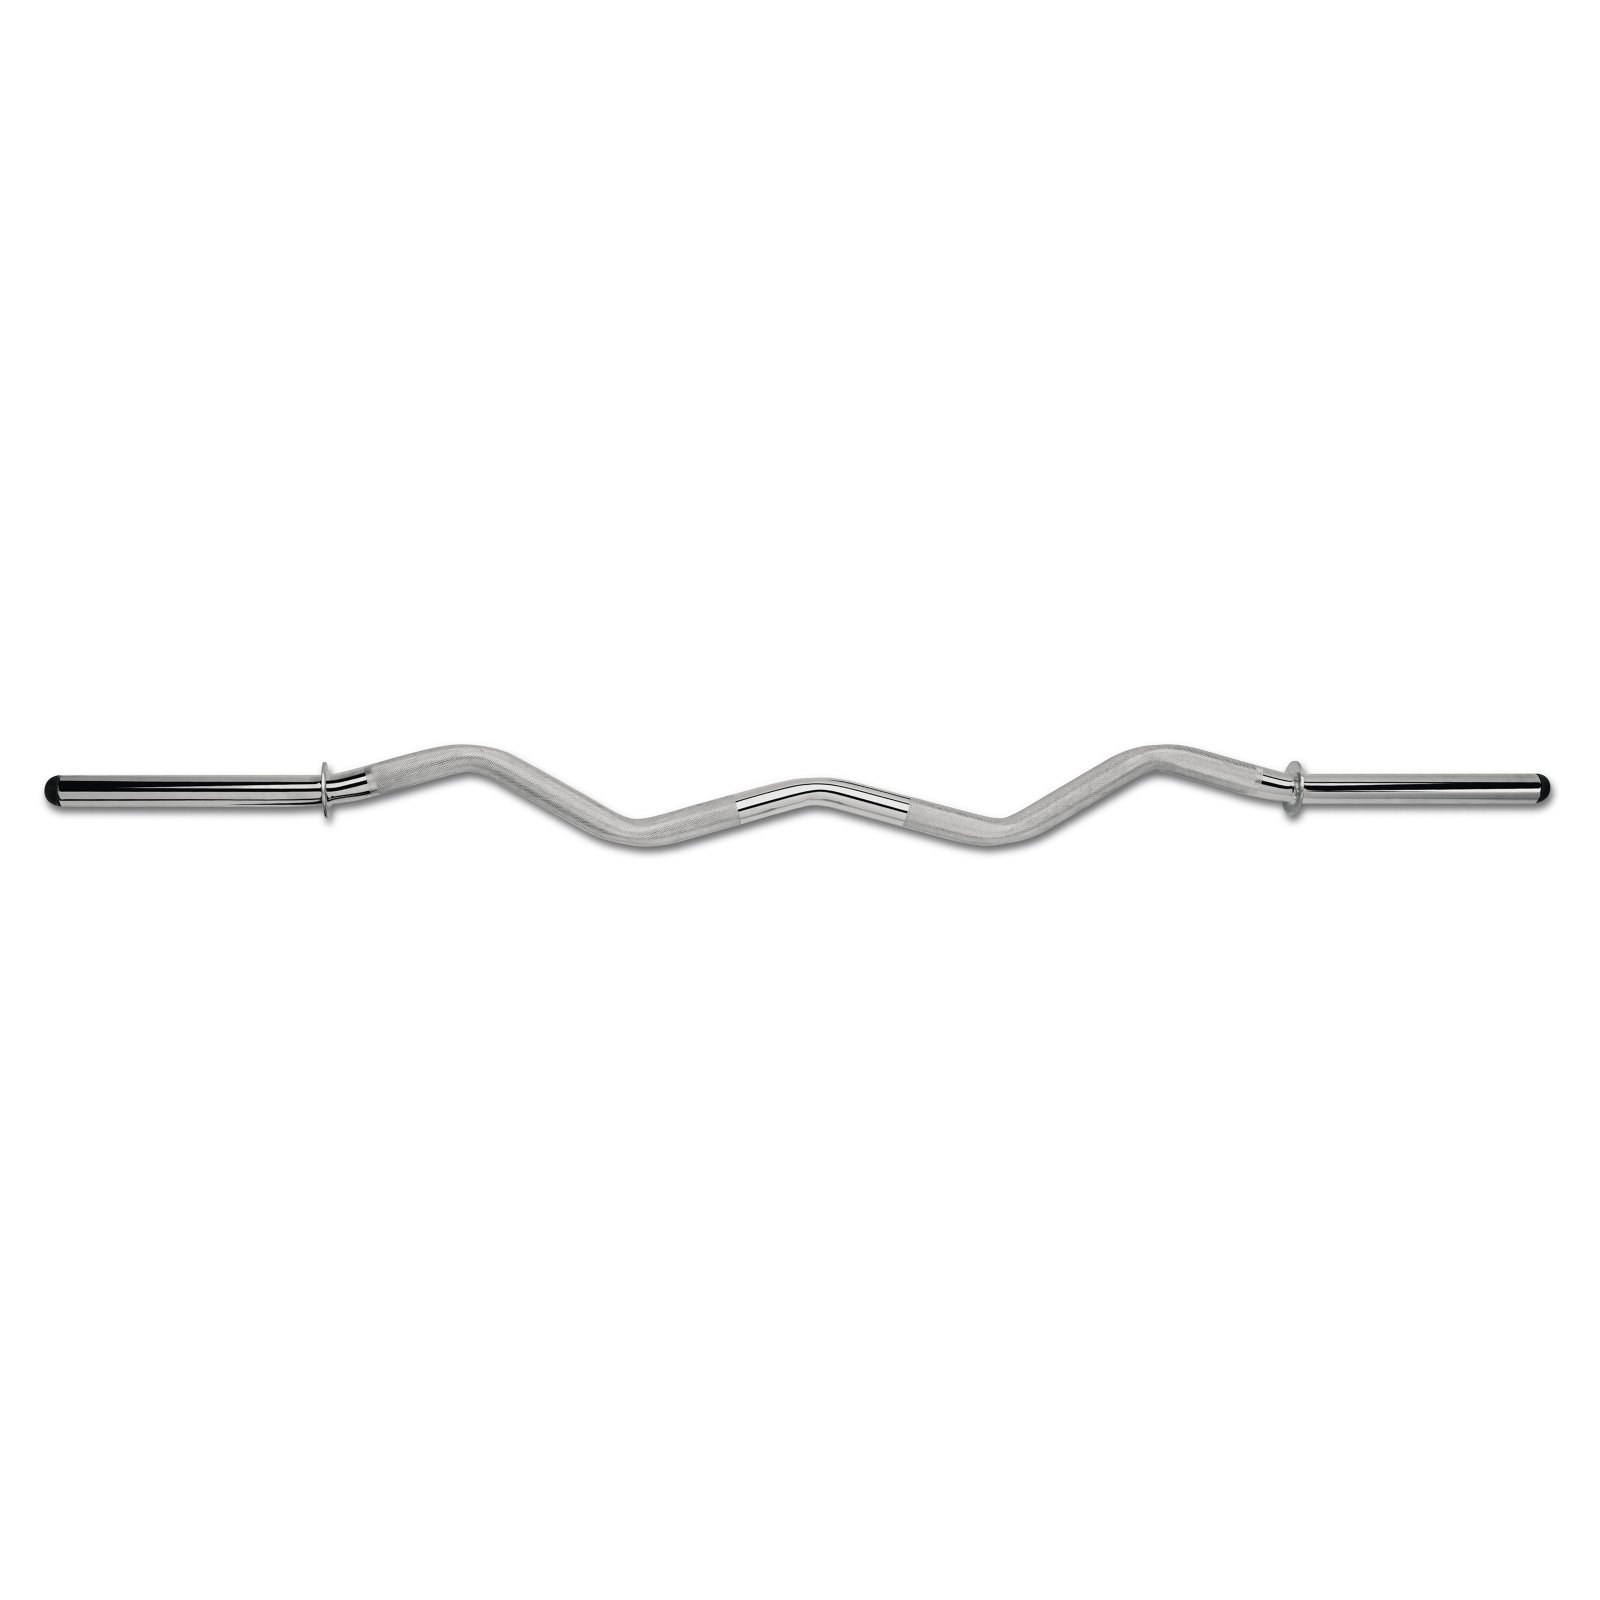 Marcy Impex Standard Curl Bar/Dumbbell Handle Combo: SDC-10.1 - image 4 of 5